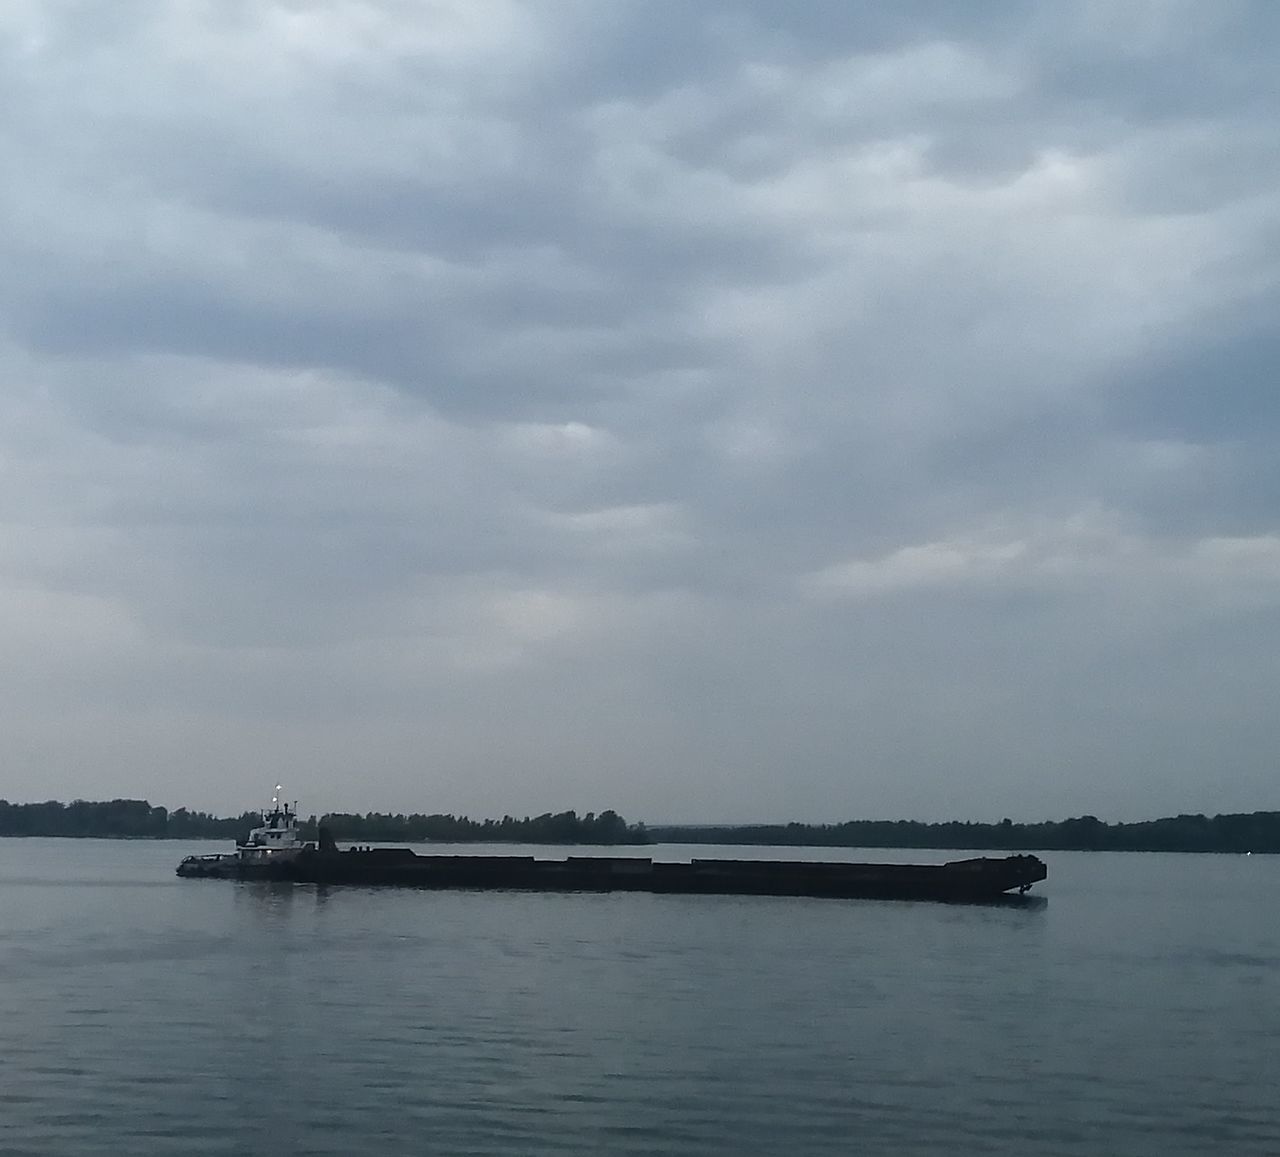 water, cloud, sky, sea, transportation, vehicle, nautical vessel, nature, no people, mode of transportation, beauty in nature, scenics - nature, day, architecture, bay, outdoors, horizon, tranquility, channel, tranquil scene, pier, travel, overcast, ship, travel destinations, boat, coast, built structure, environment